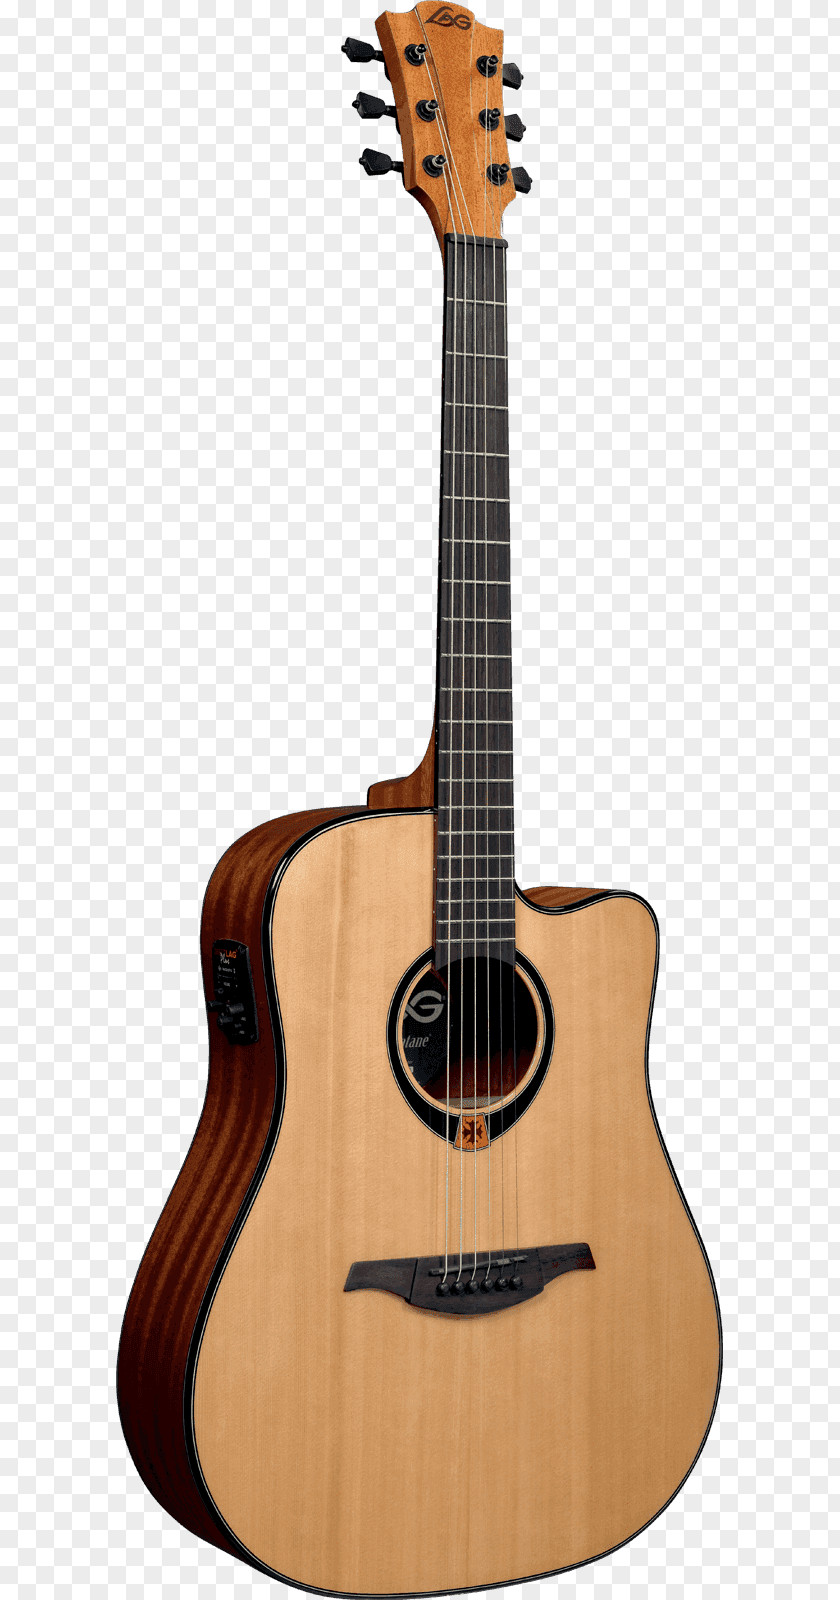 Acoustic Guitar Dreadnought Cutaway Acoustic-electric PNG